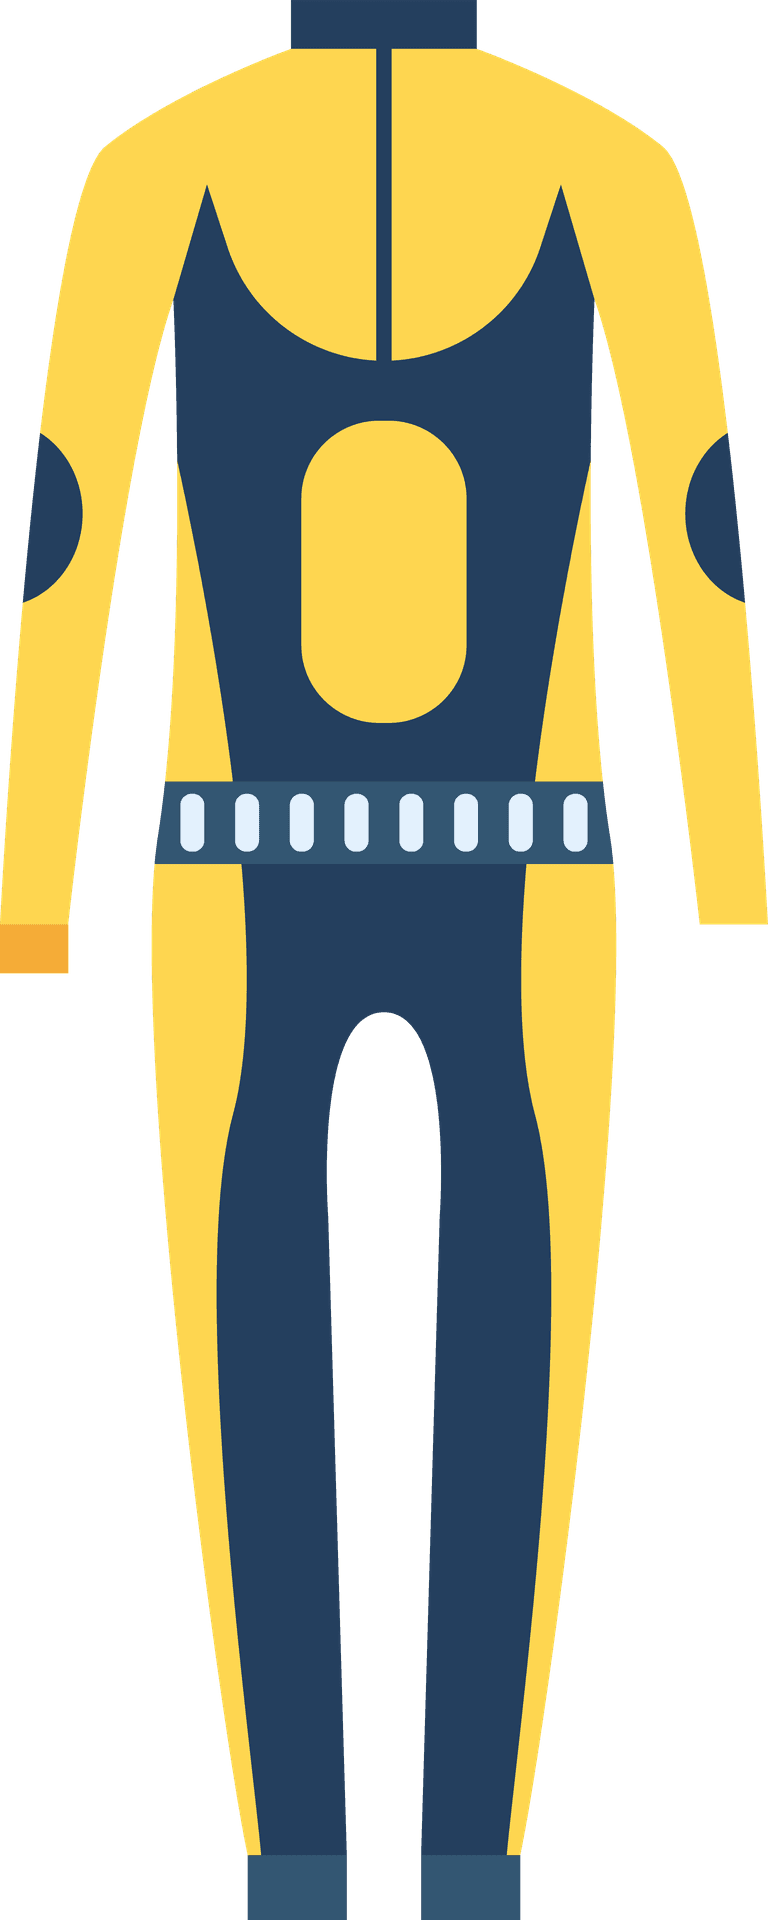 diving suits diving equipment illustration with flat color style